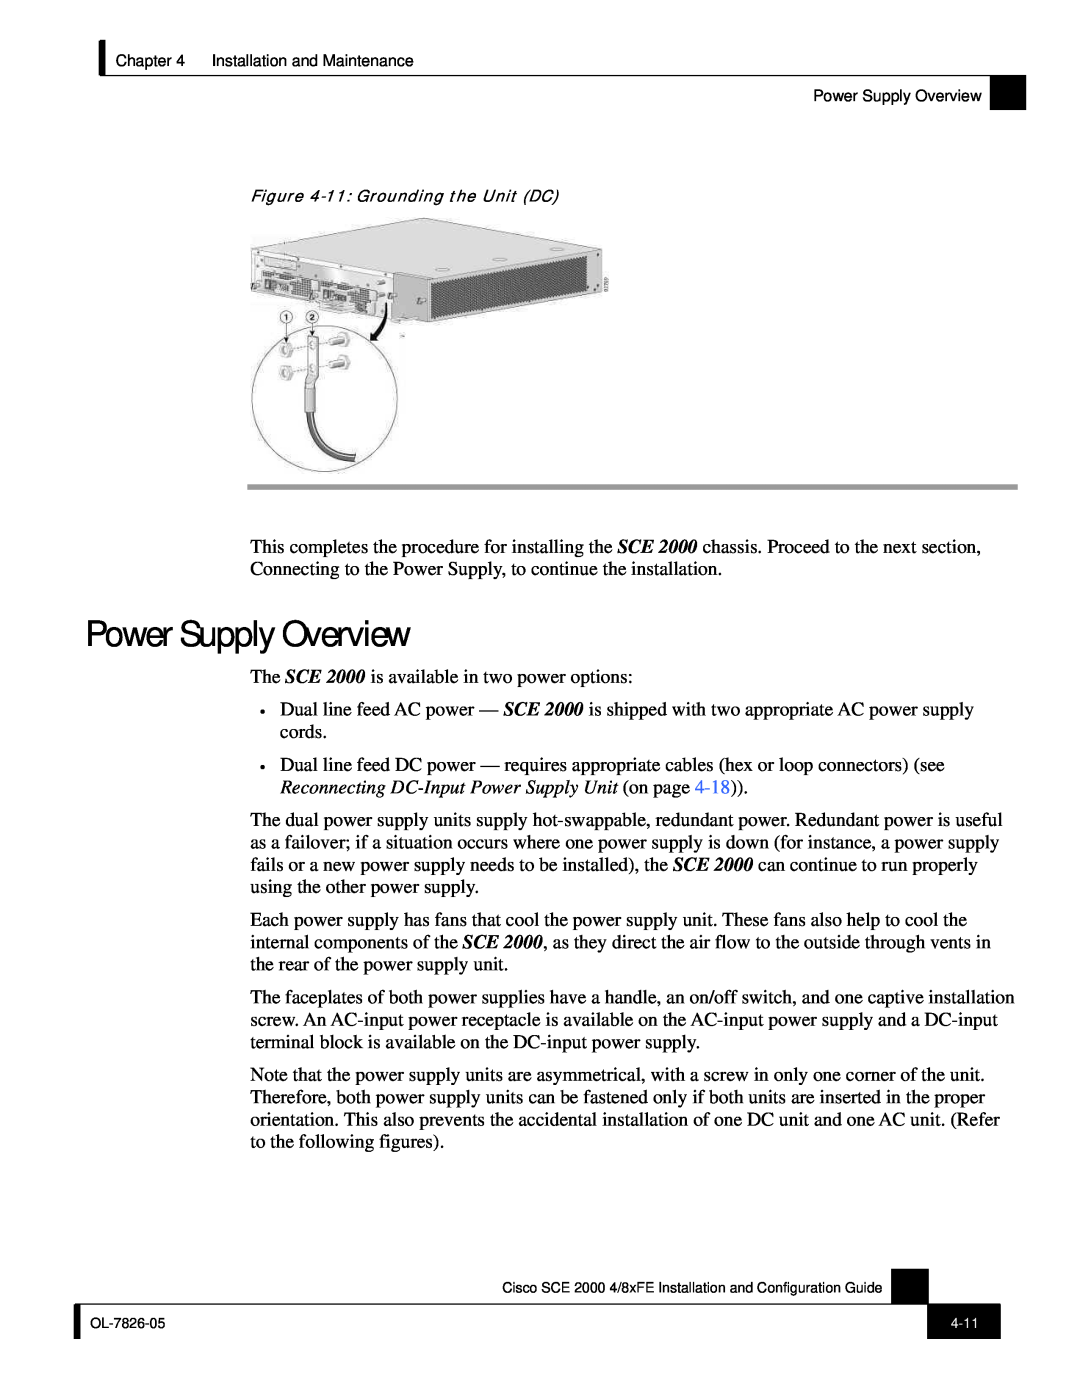 Cisco Systems SCE 2000 4/8xFE manual Power Supply Overview 